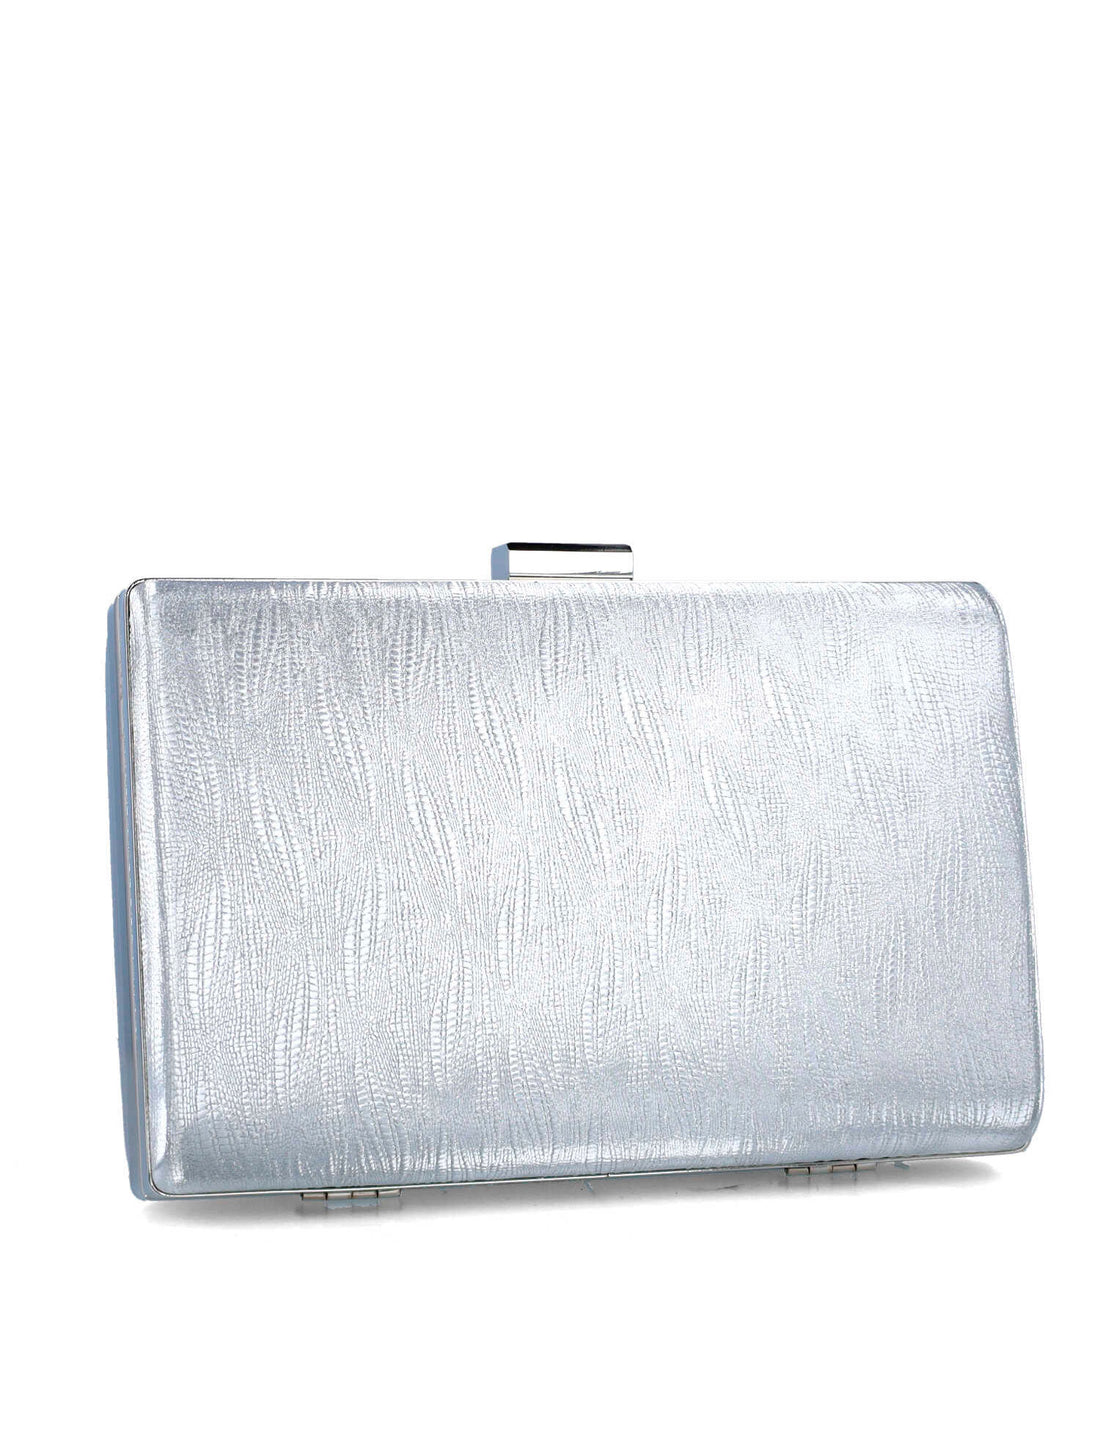 Silver Clutch With Design_85496_09_02